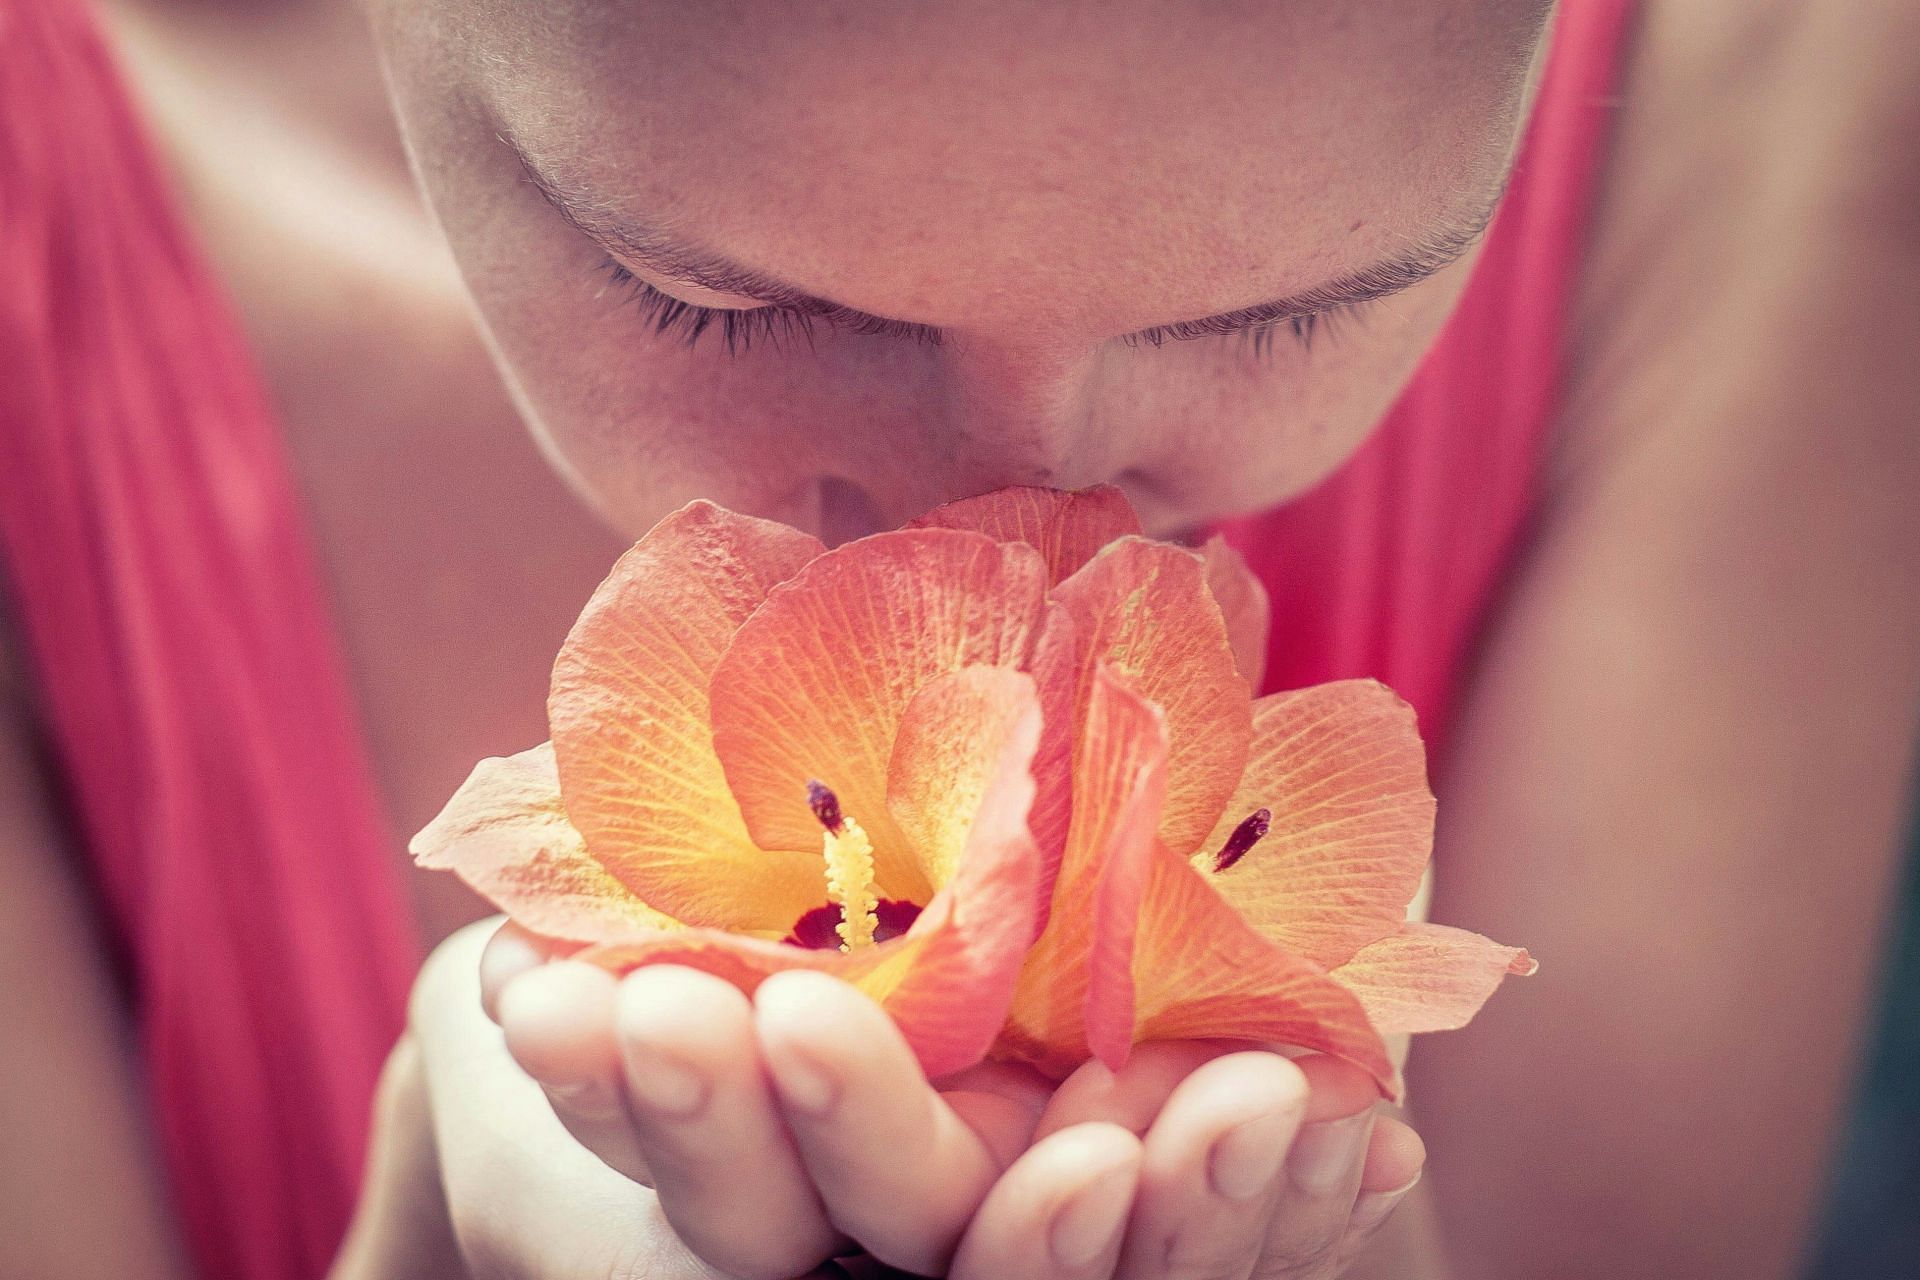 Can scent therapy aid in recalling personal memories? (Image via Unsplash/ Ruslan)